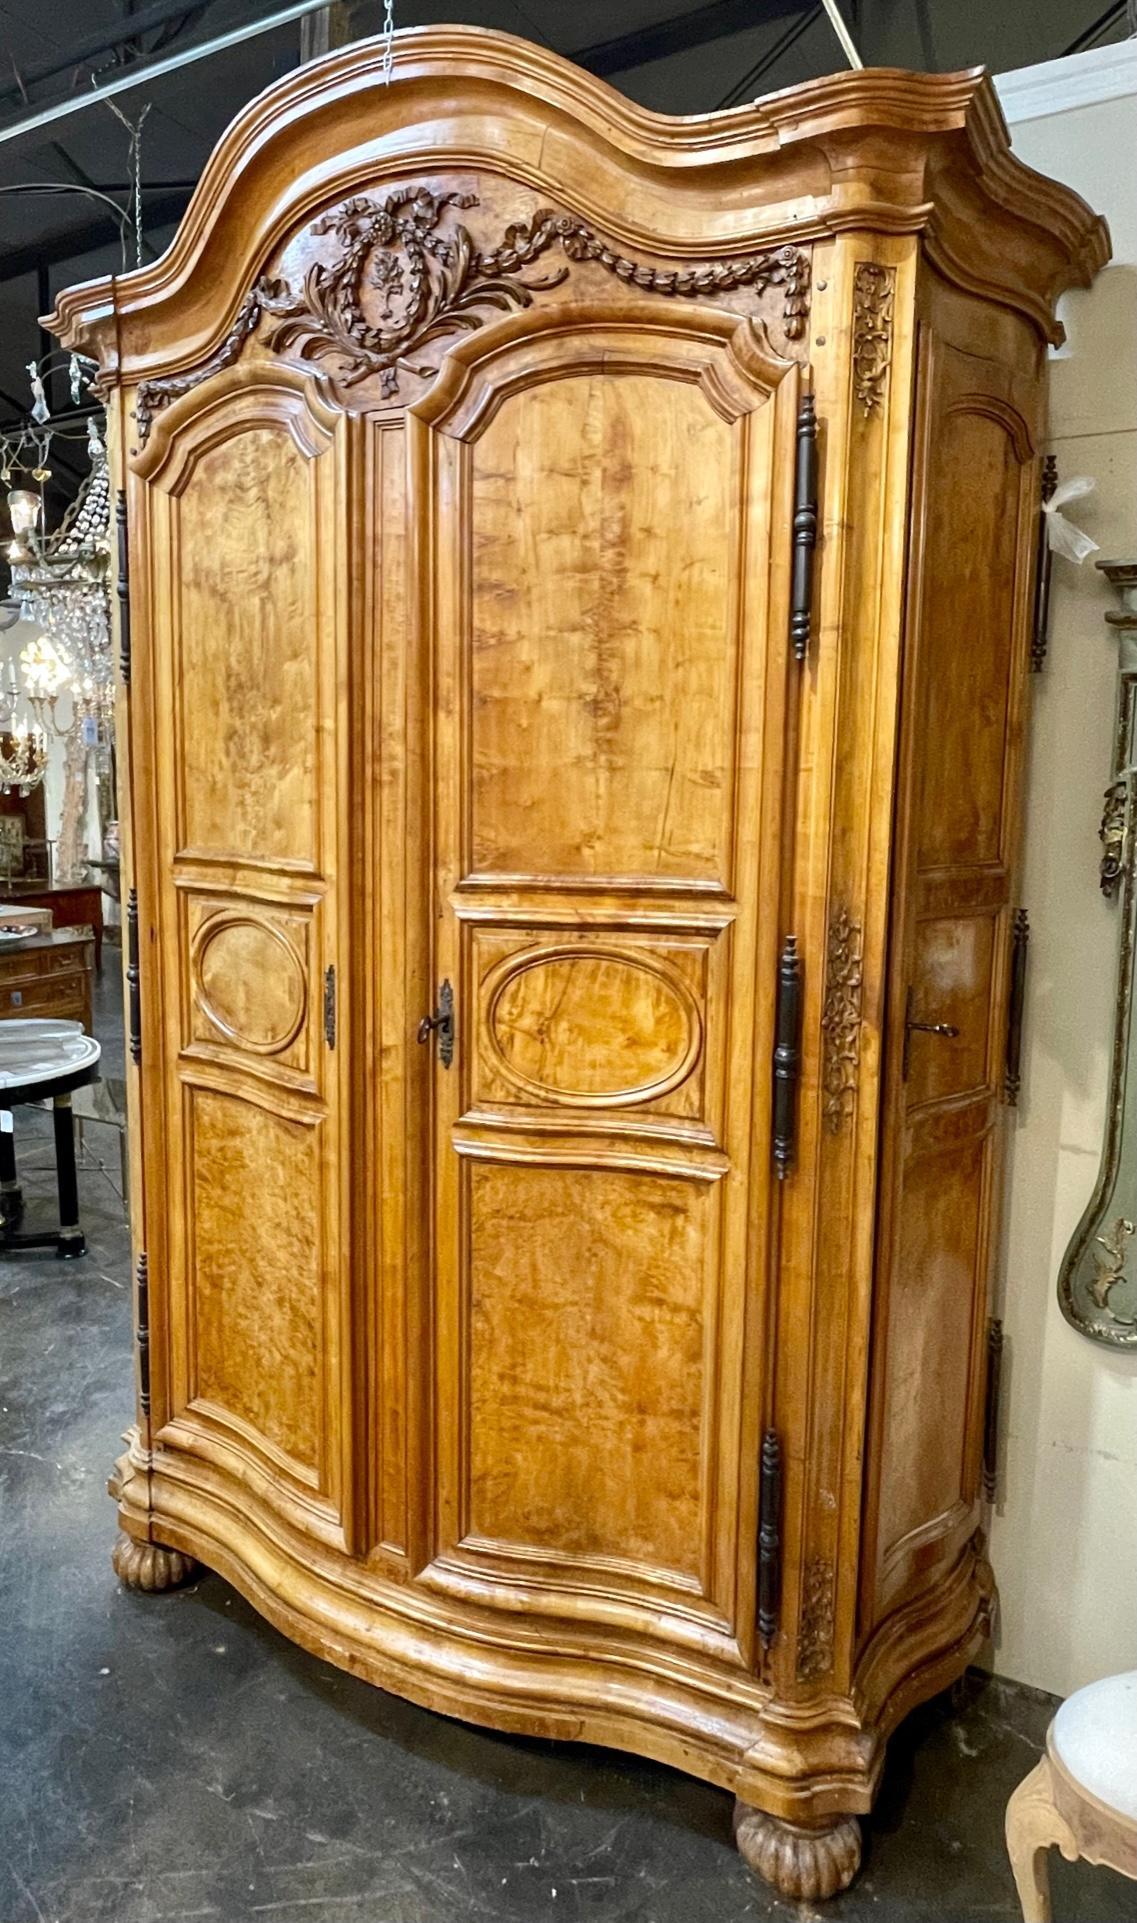 Outstanding 18th century French carved burl walnut four door armoire from Lyon. This stunning piece has so many functions. It could be a wonderful coffee bar, stemware storage, as well as linen storage. This piece is sure to make a statement.